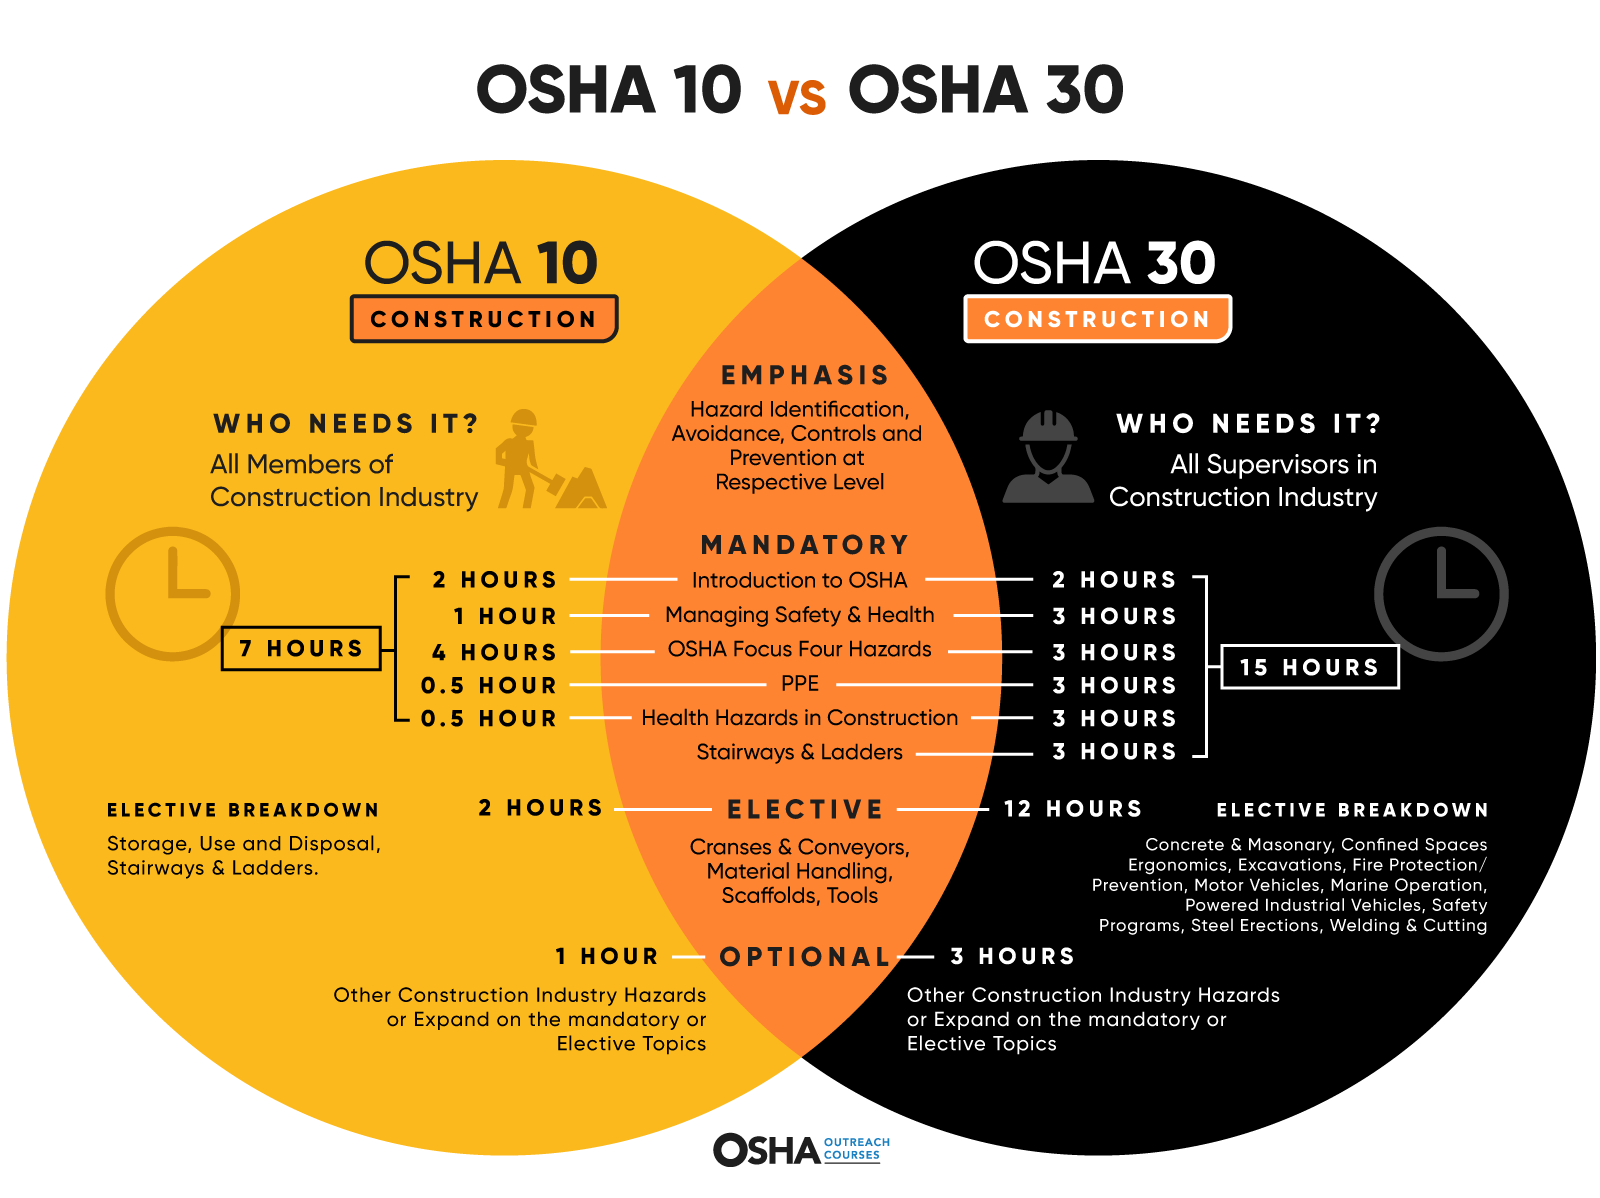 The Main Difference Between OSHA 10 & 30